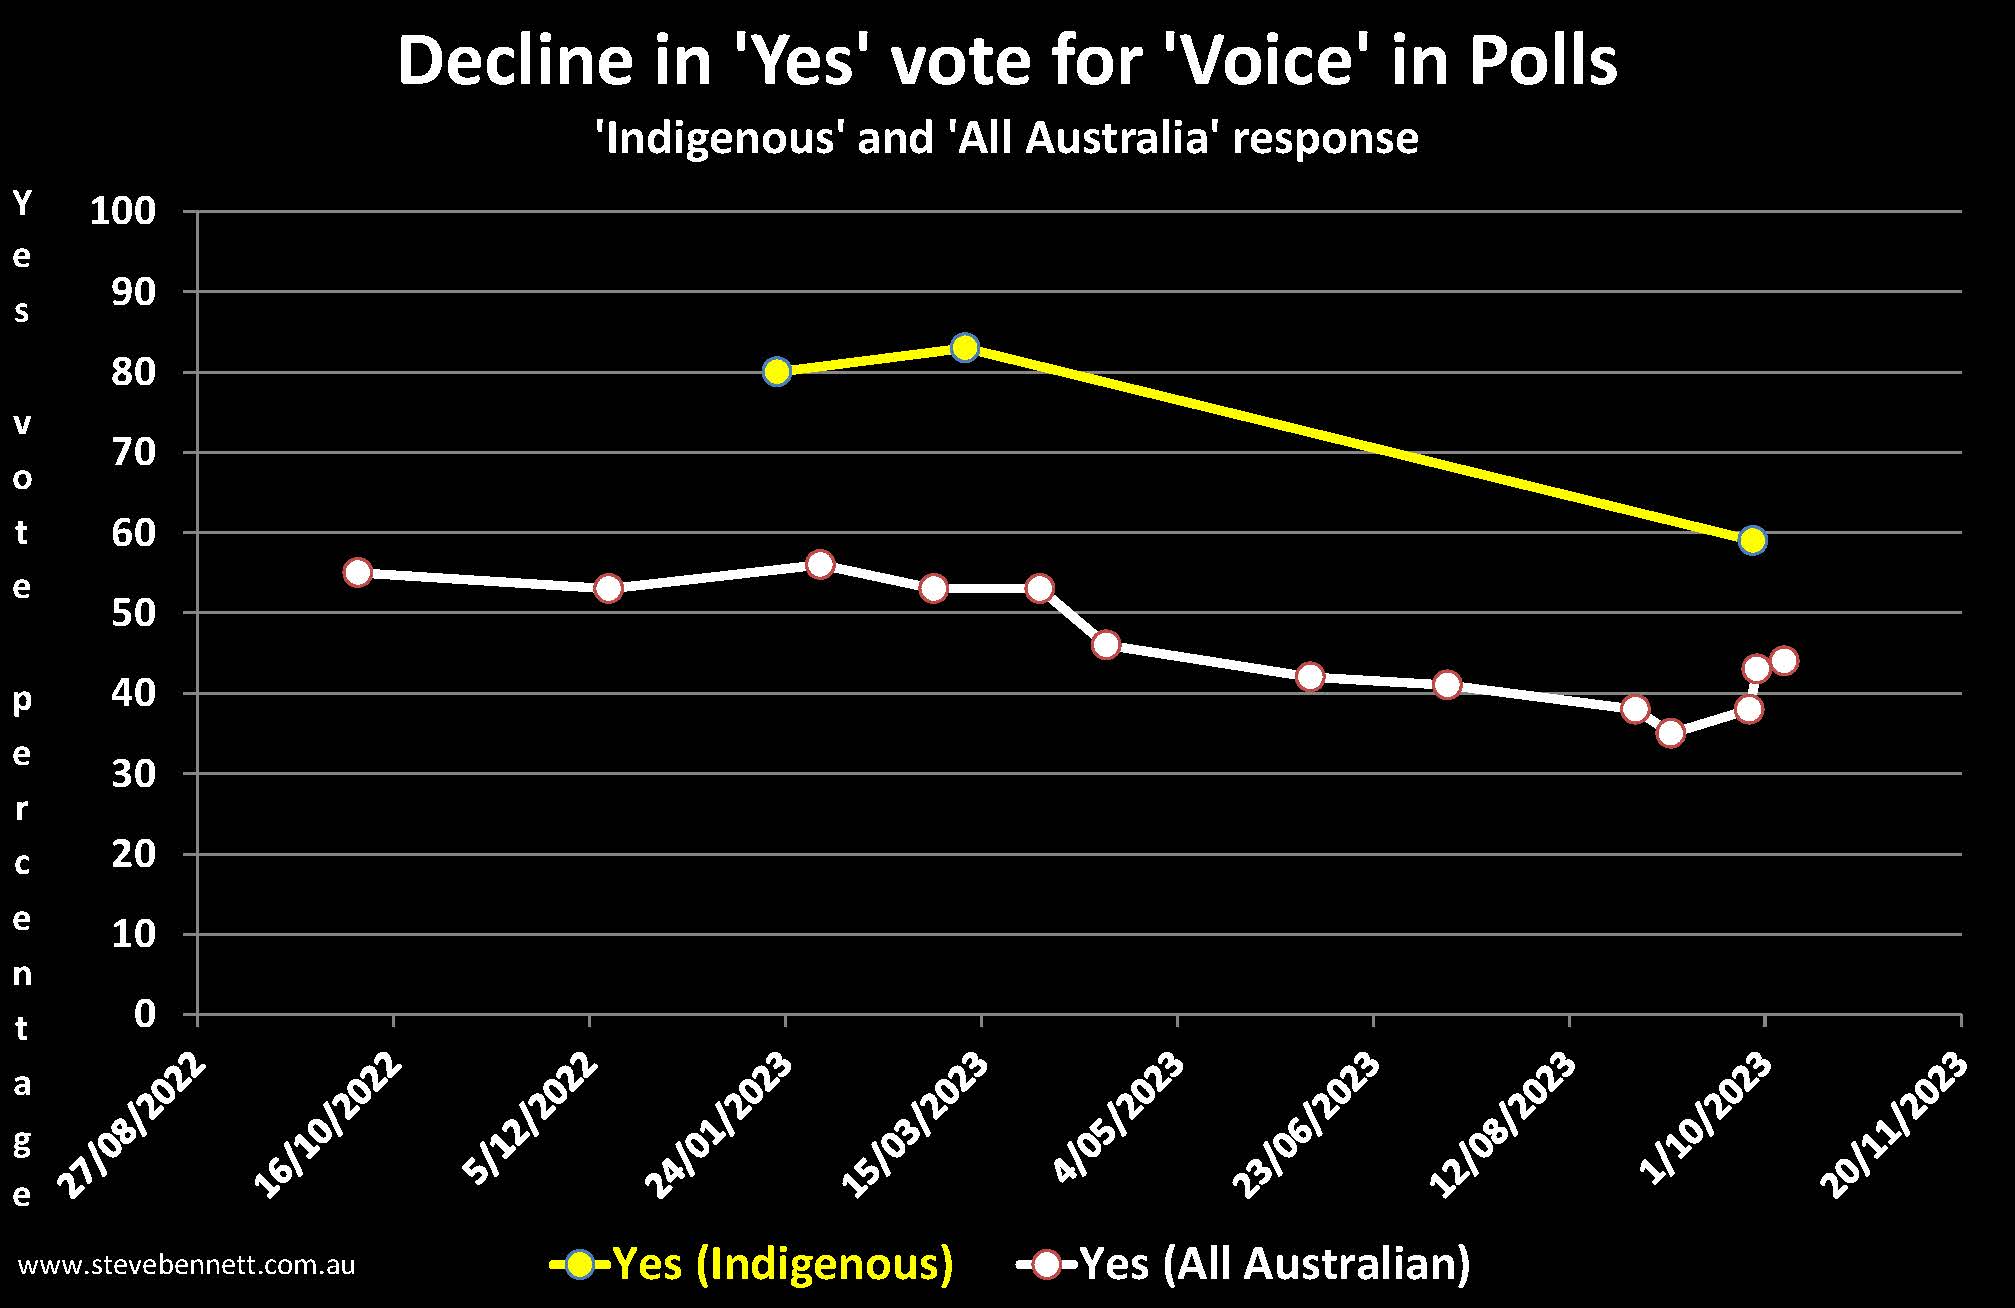 Chart of Yes vote intenetions from polling from Indigenous and All Australian samples for Voice referendum